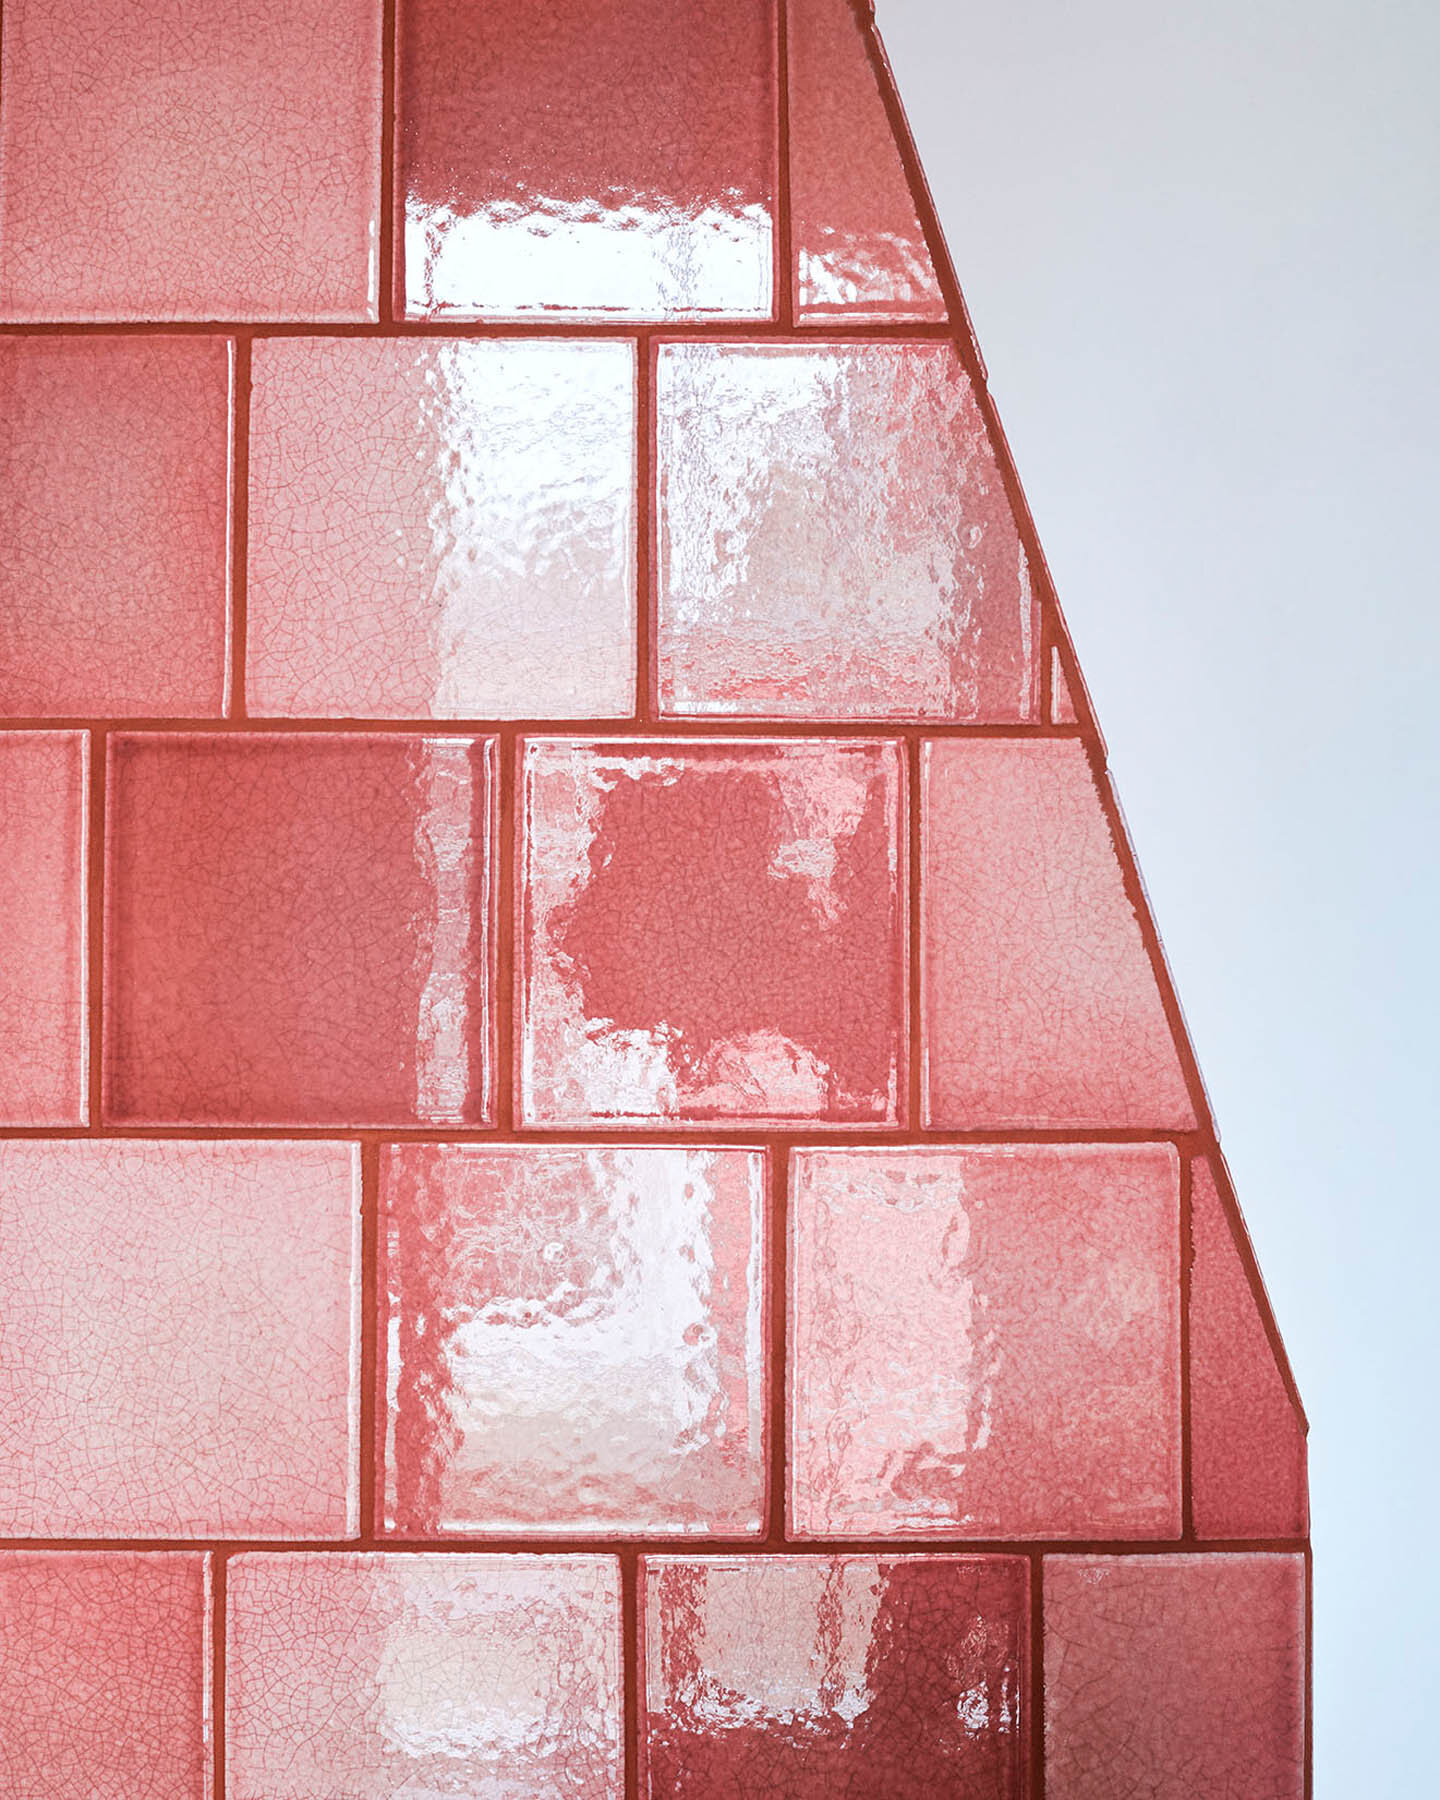 Chimney with lava stone tiles in format 10x10x1 cm glazed with 'Coral Red Shiny Crystal' 